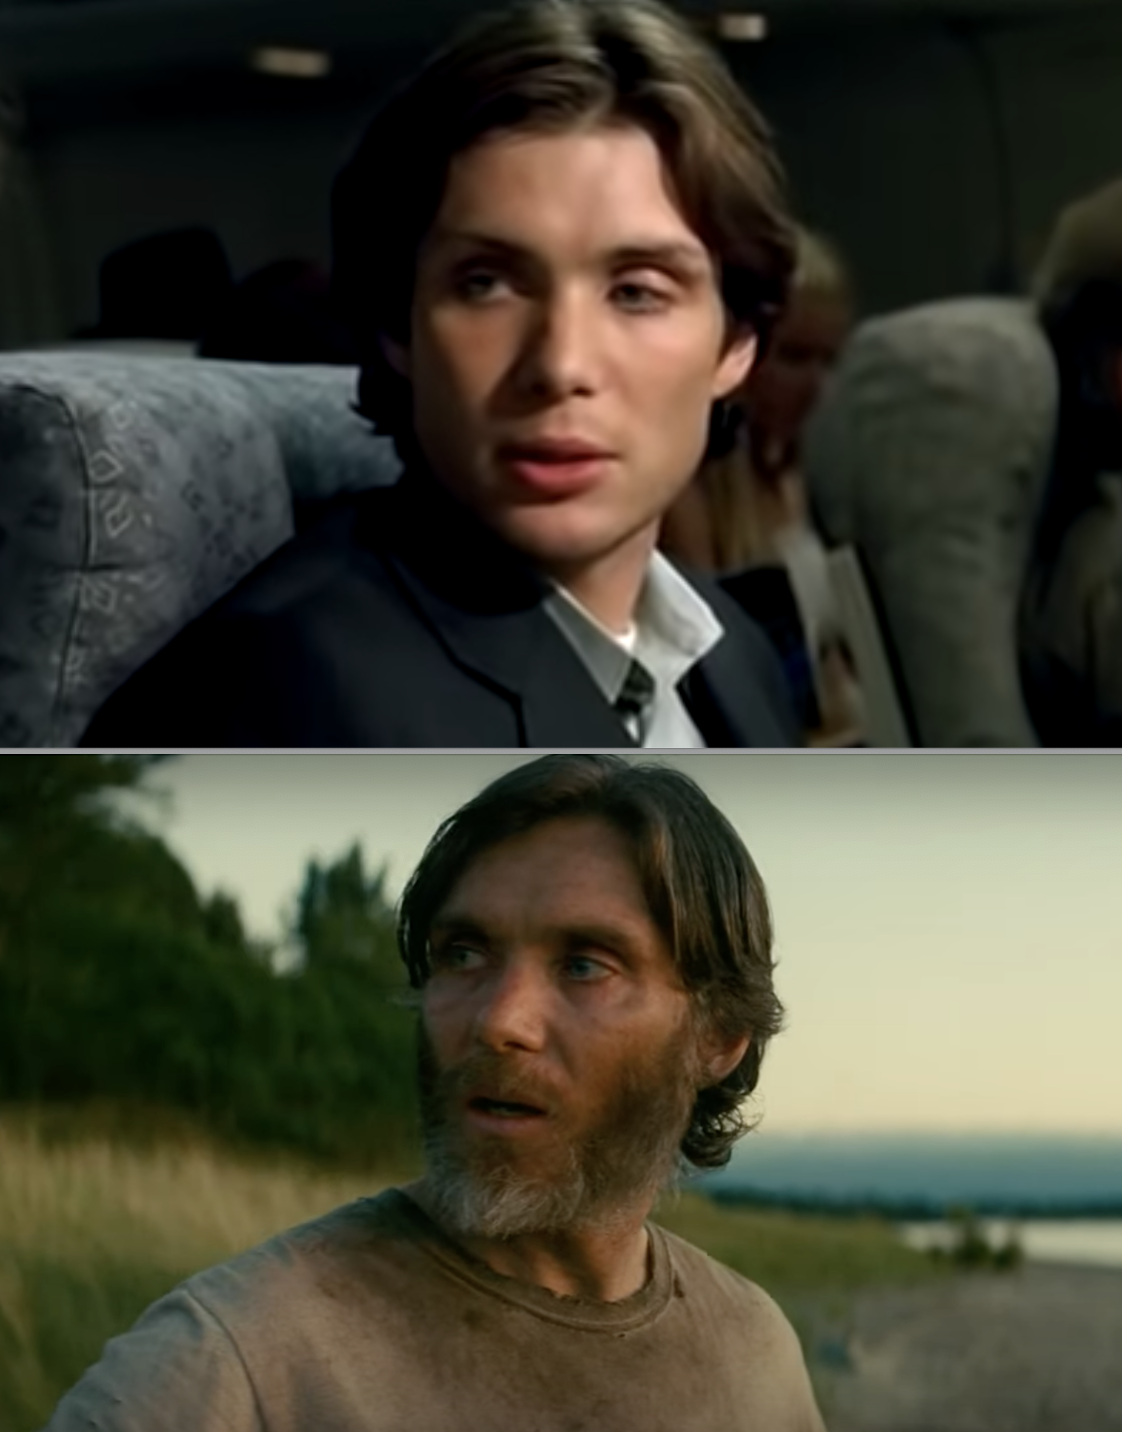 Cillian in &quot;Red Eye&quot; and &quot;A Quiet Place II&quot;